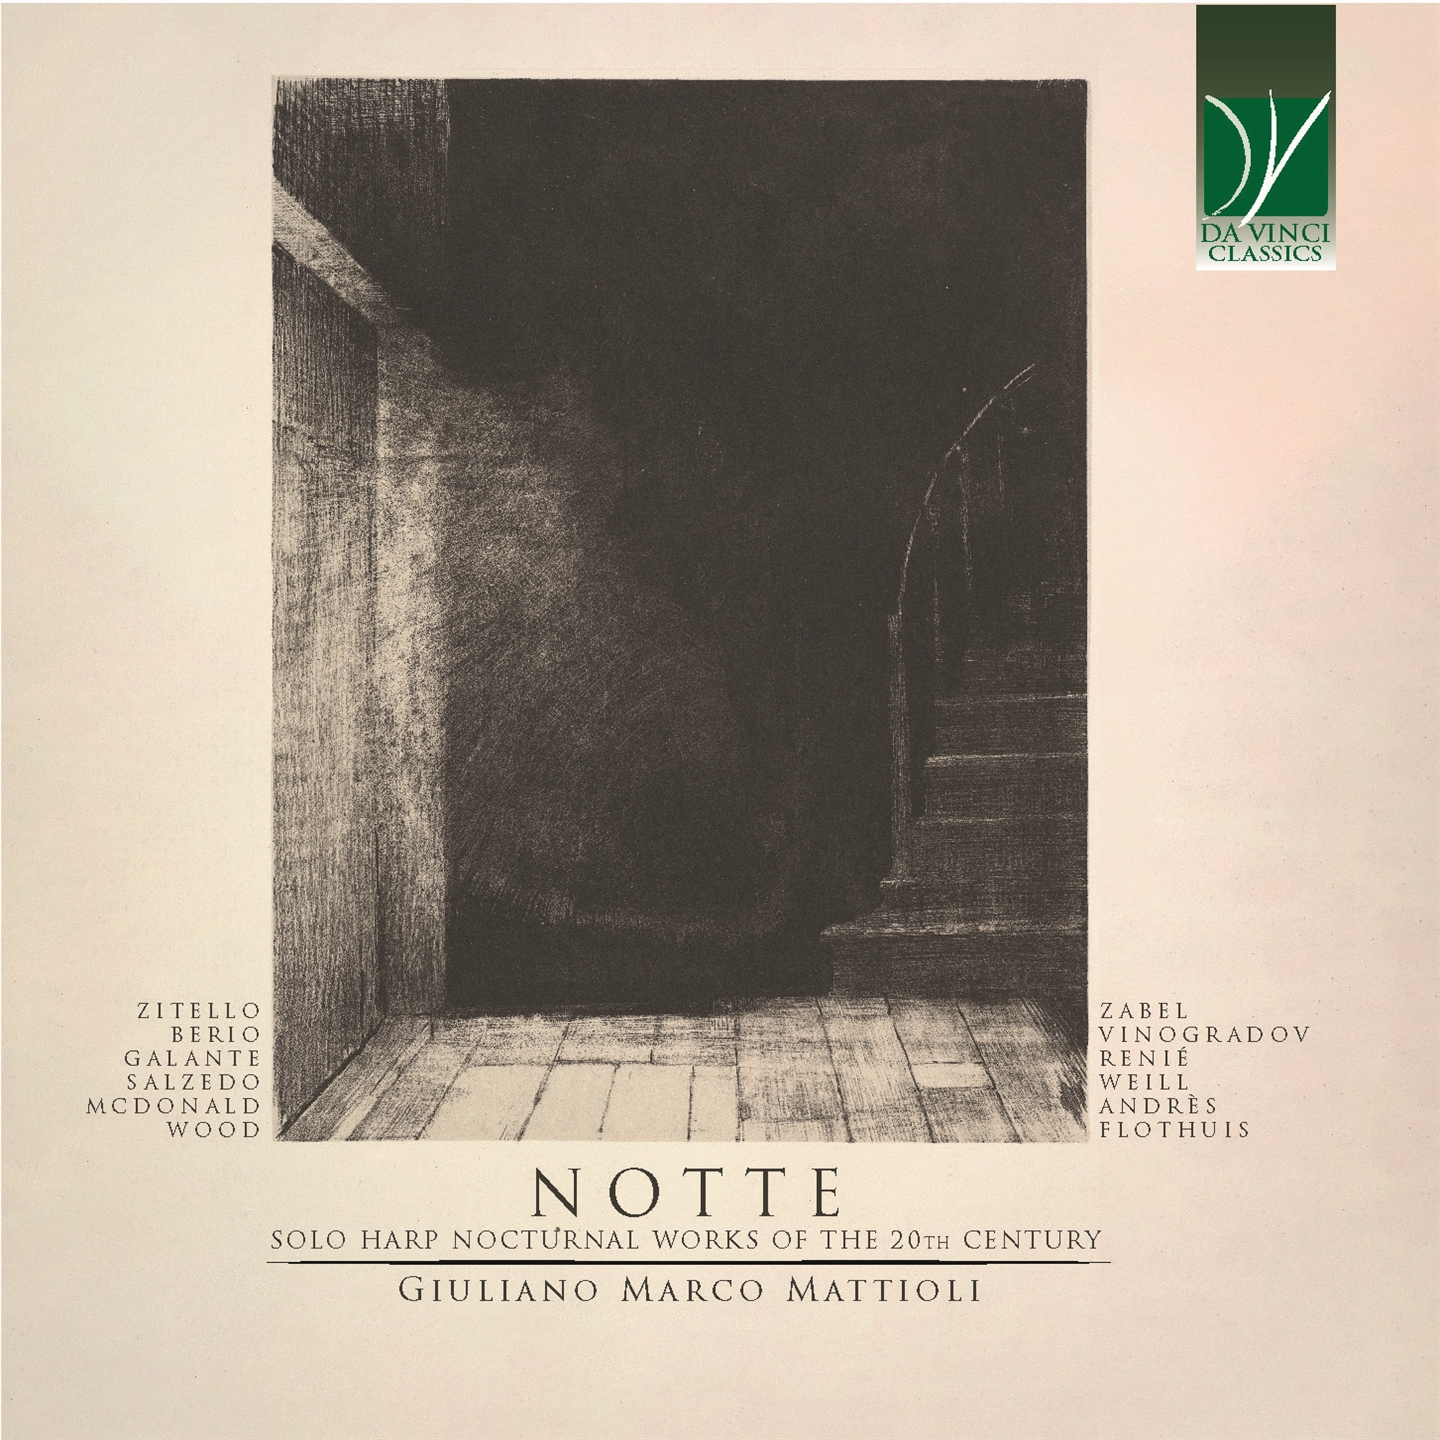 NOTTE - SOLO HARP NOCTURNAL WORKS OF THE 20TH CENTURY